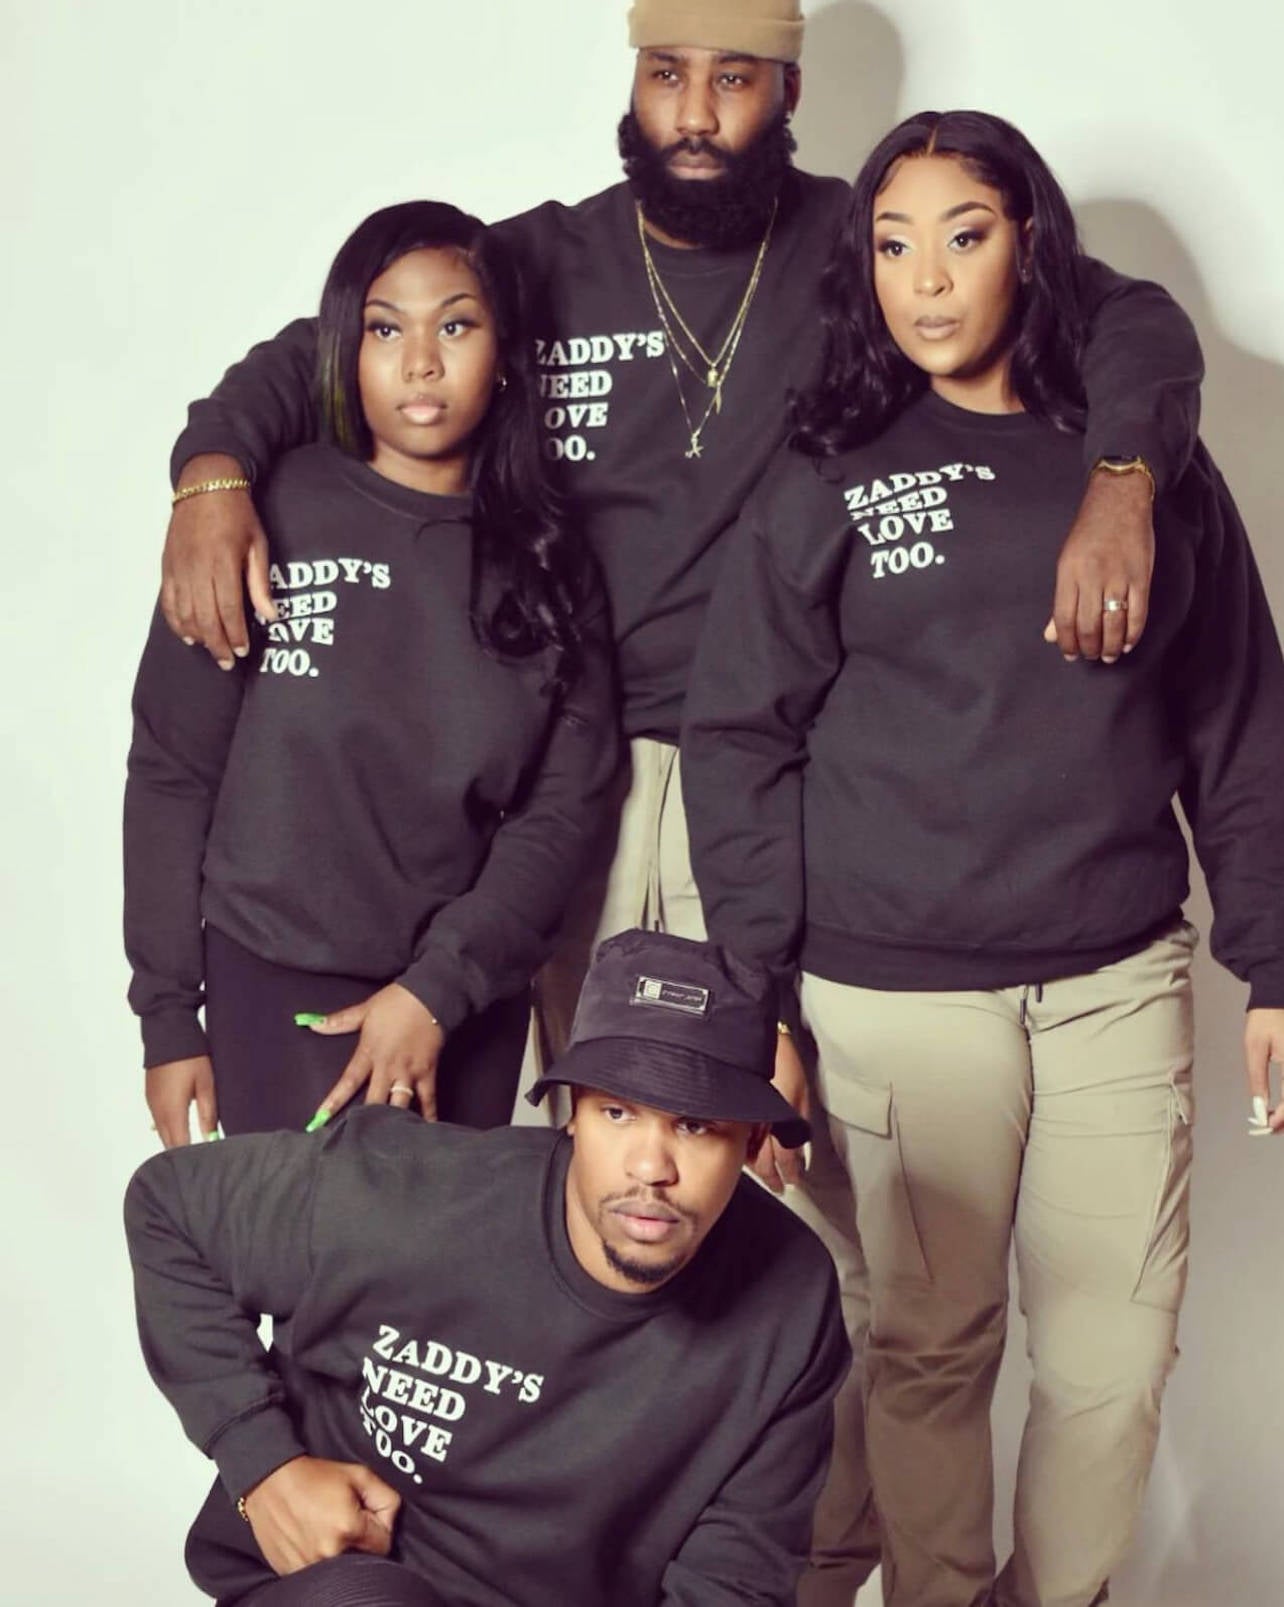 A group photo of two women and two men. All are wearing black crew neck sweaters that say, "Zaddy's Need Love Too." One man has on a Christian James Bucket Hat in black.